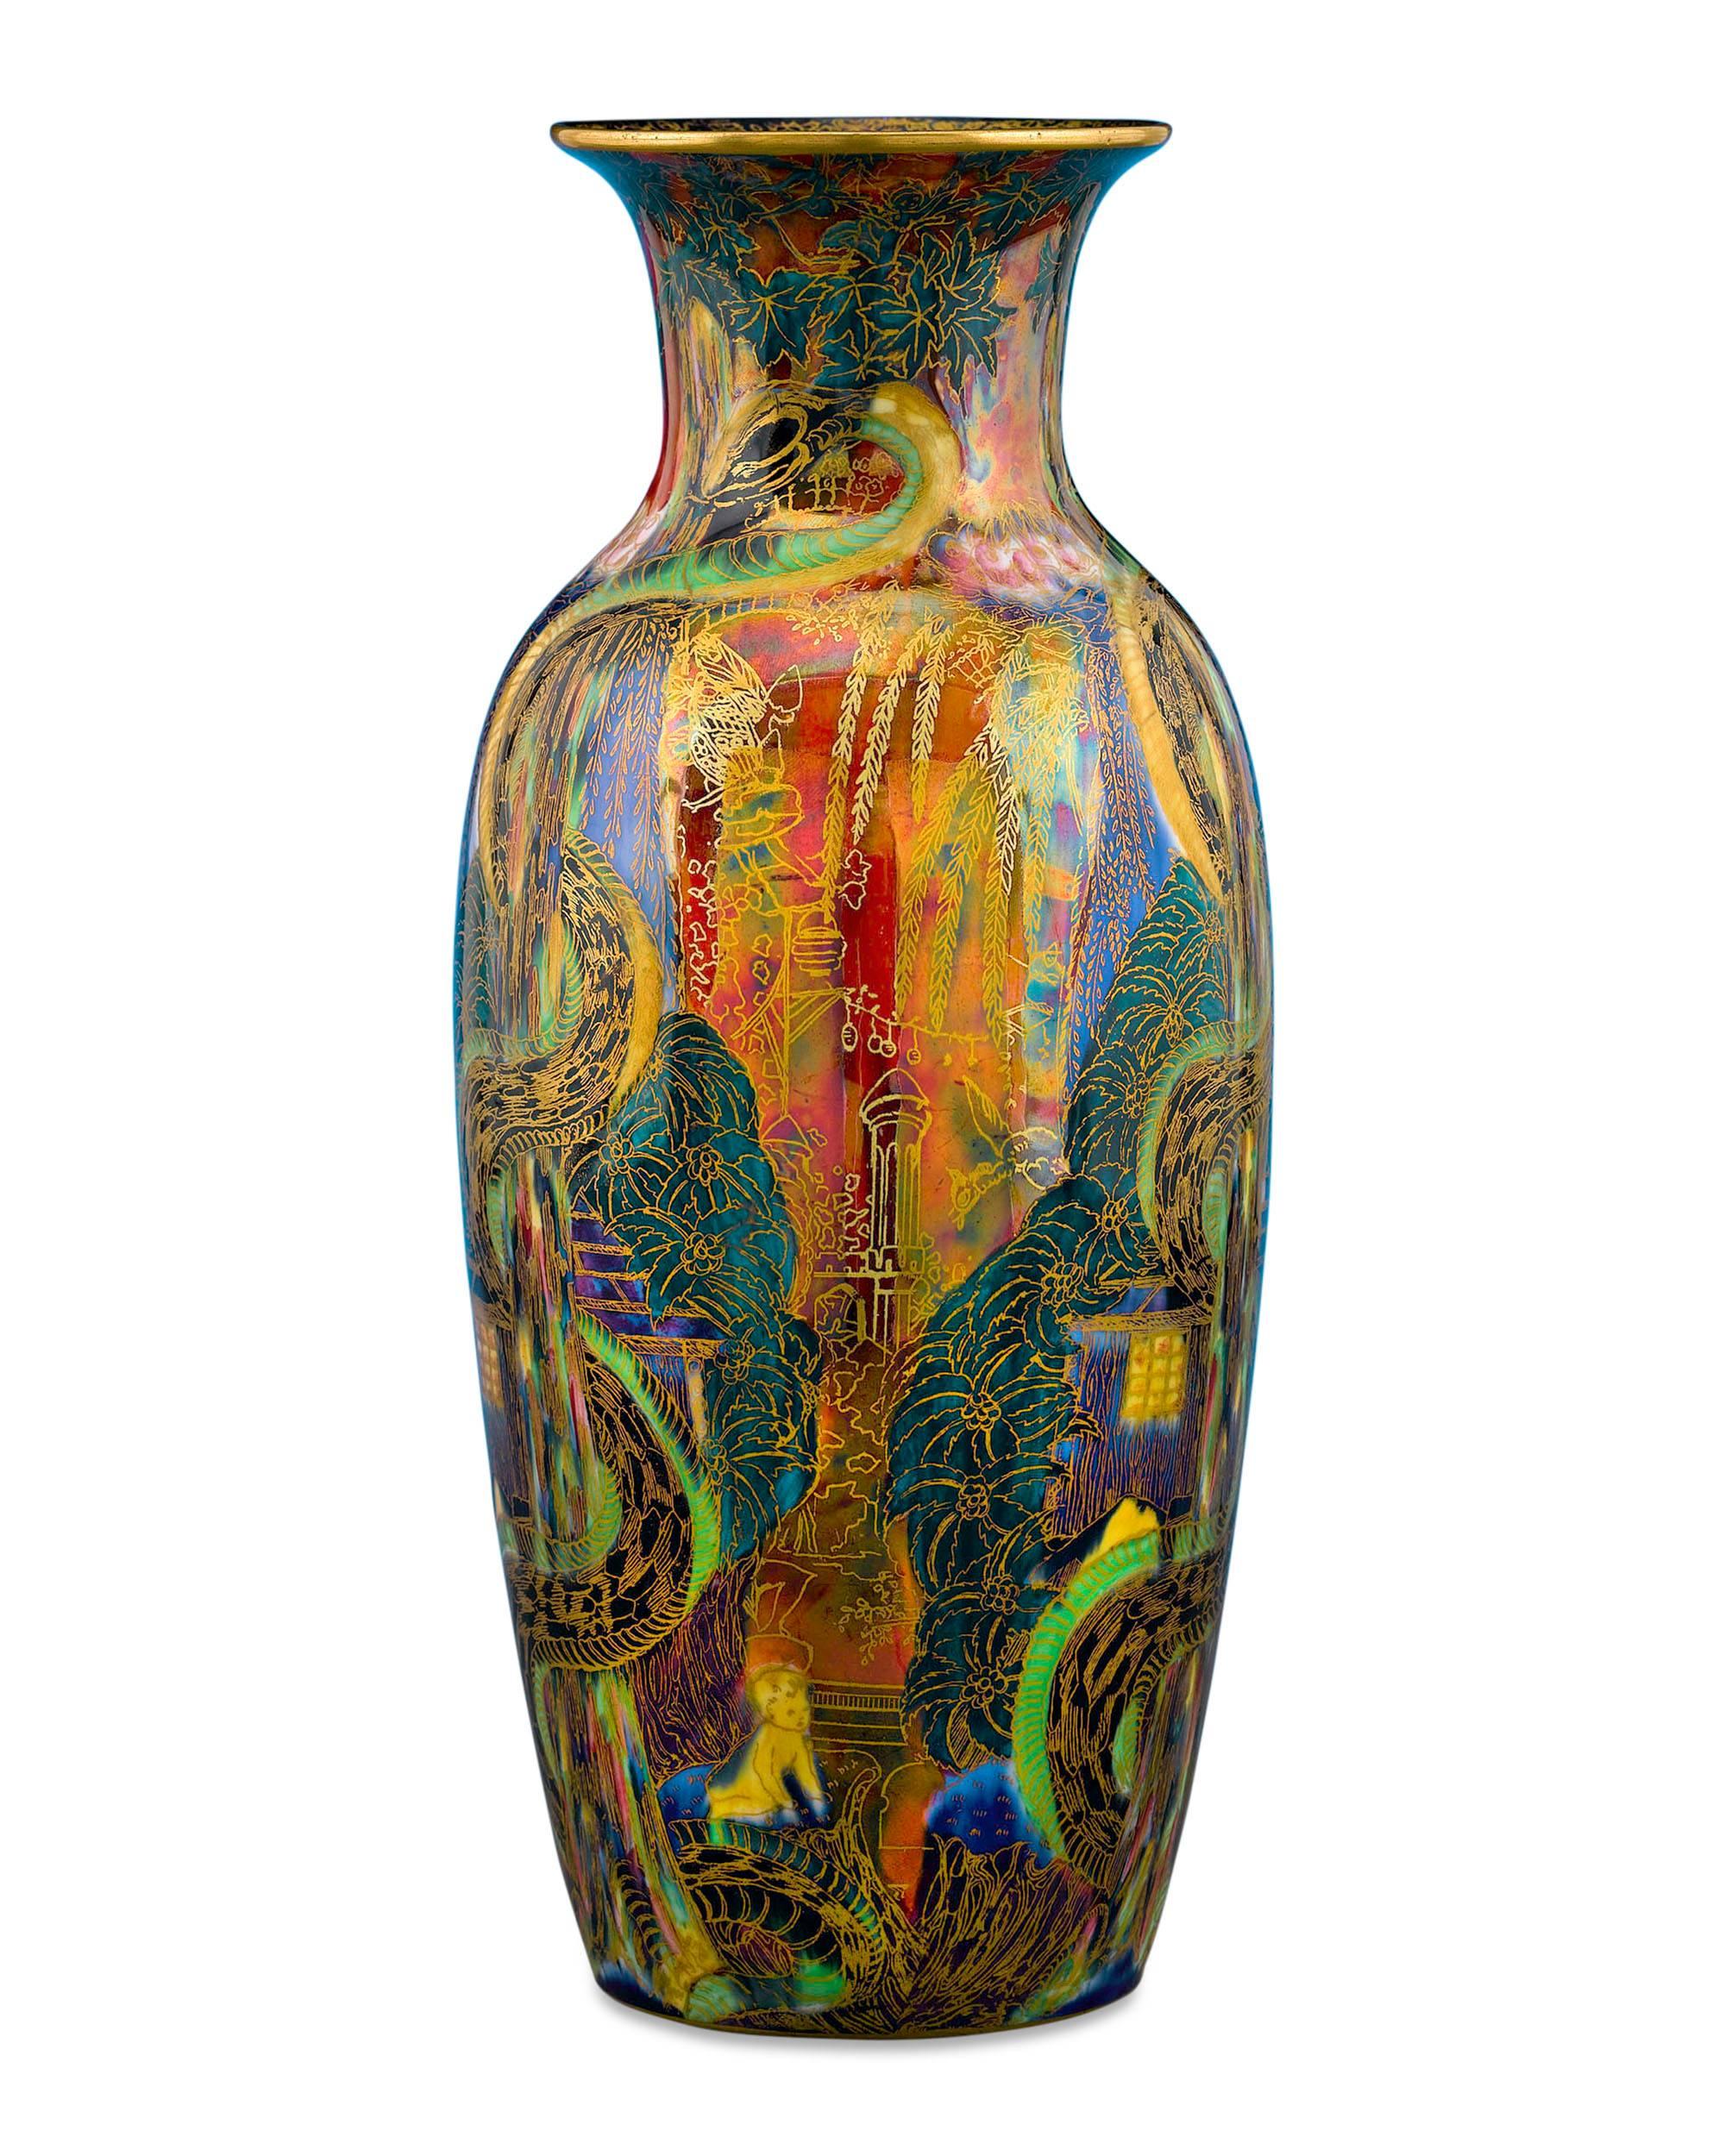 This incredible Flame Fairyland Lustre vase by Wedgwood bears the 